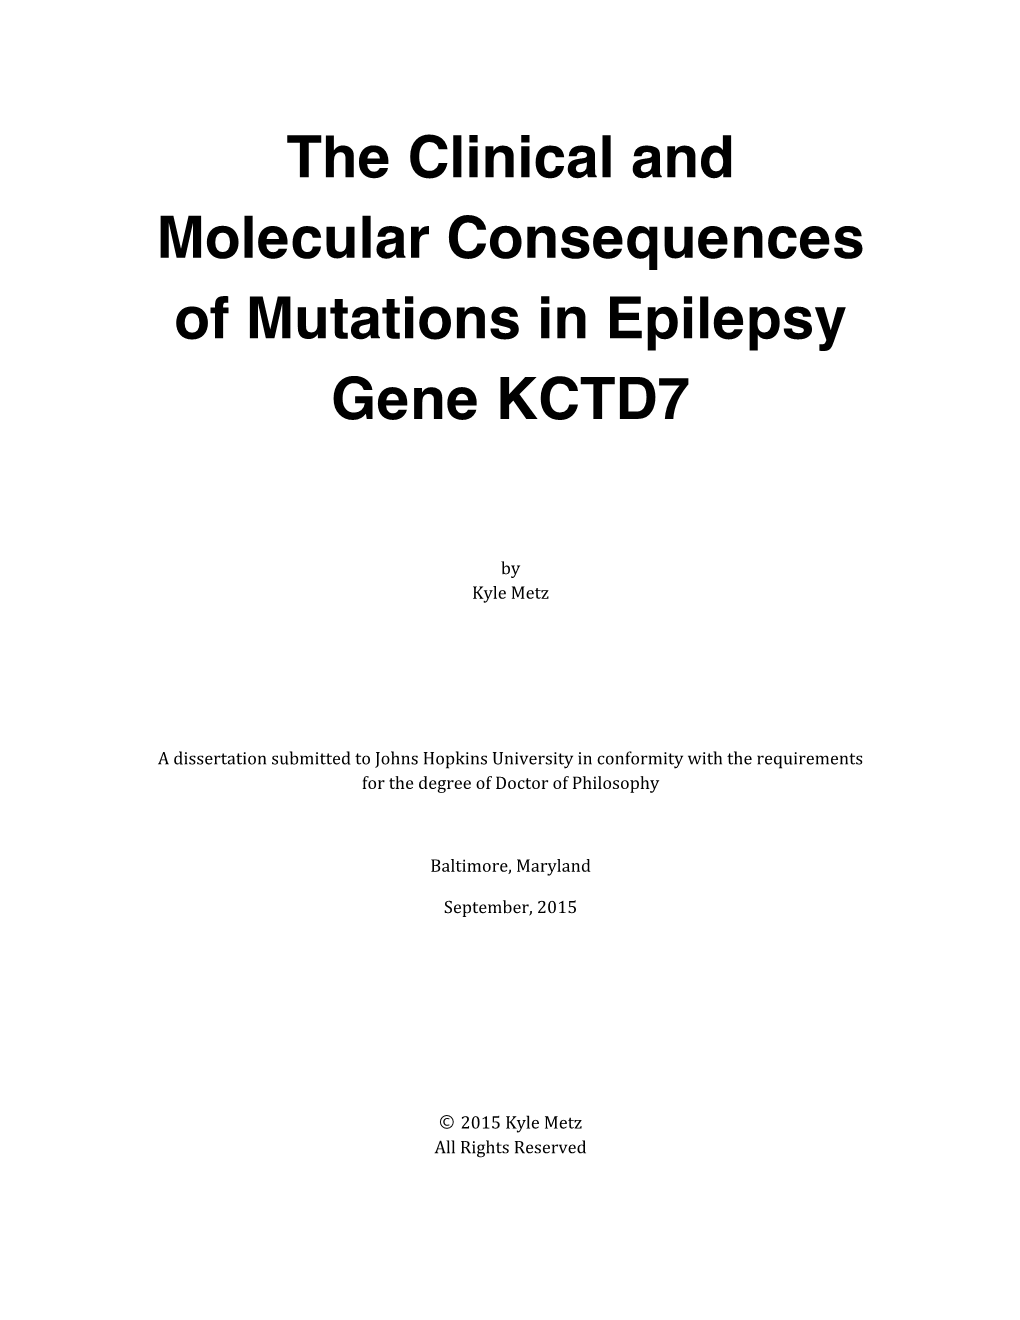 The Clinical and Molecular Consequences of Mutations in Epilepsy Gene KCTD7